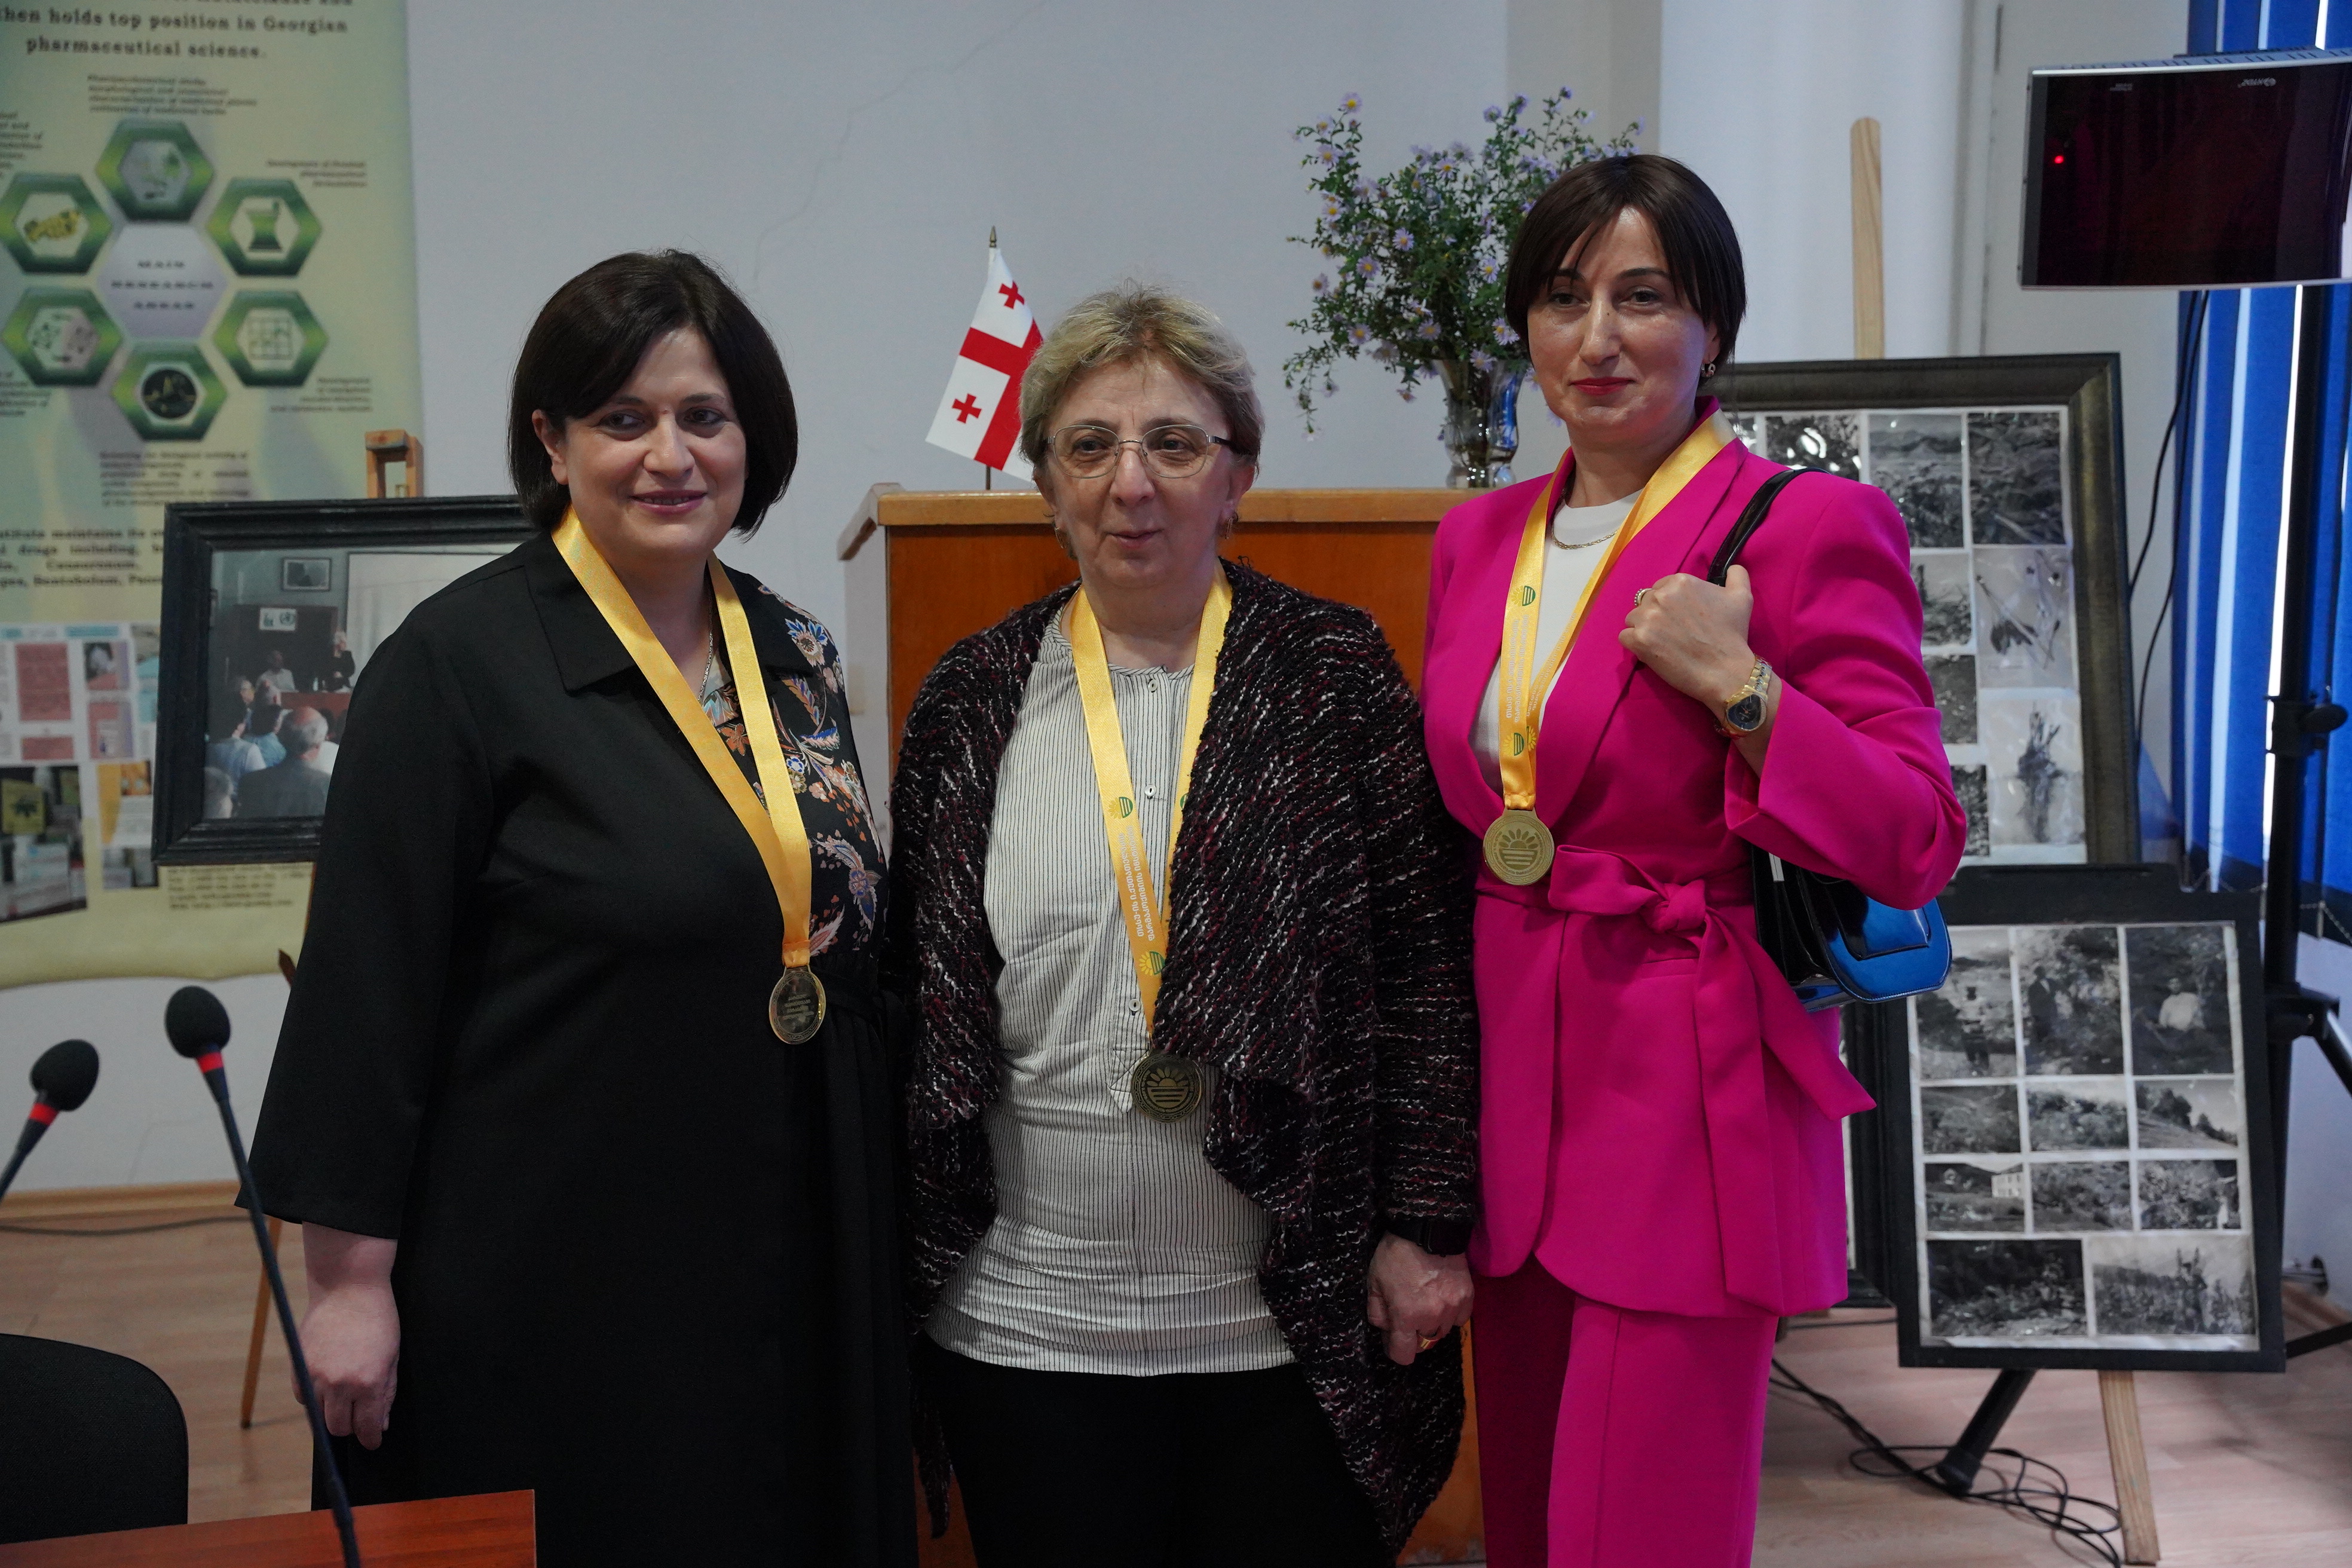 International Day of Pharmacists was celebrated on September 25